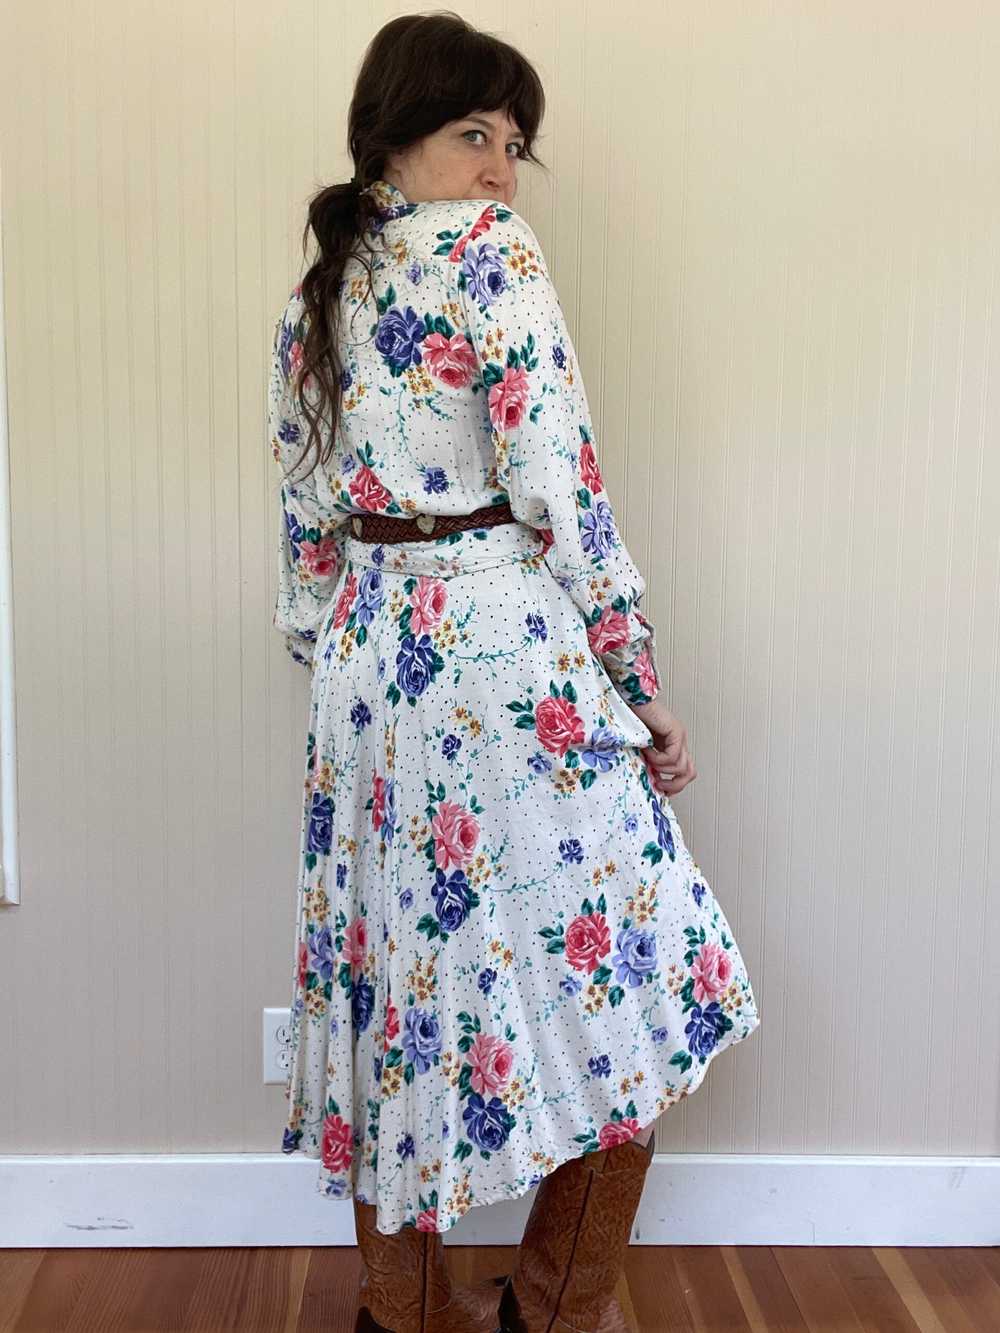 80s/90s Does 40s Floral Peplum Dress - image 5